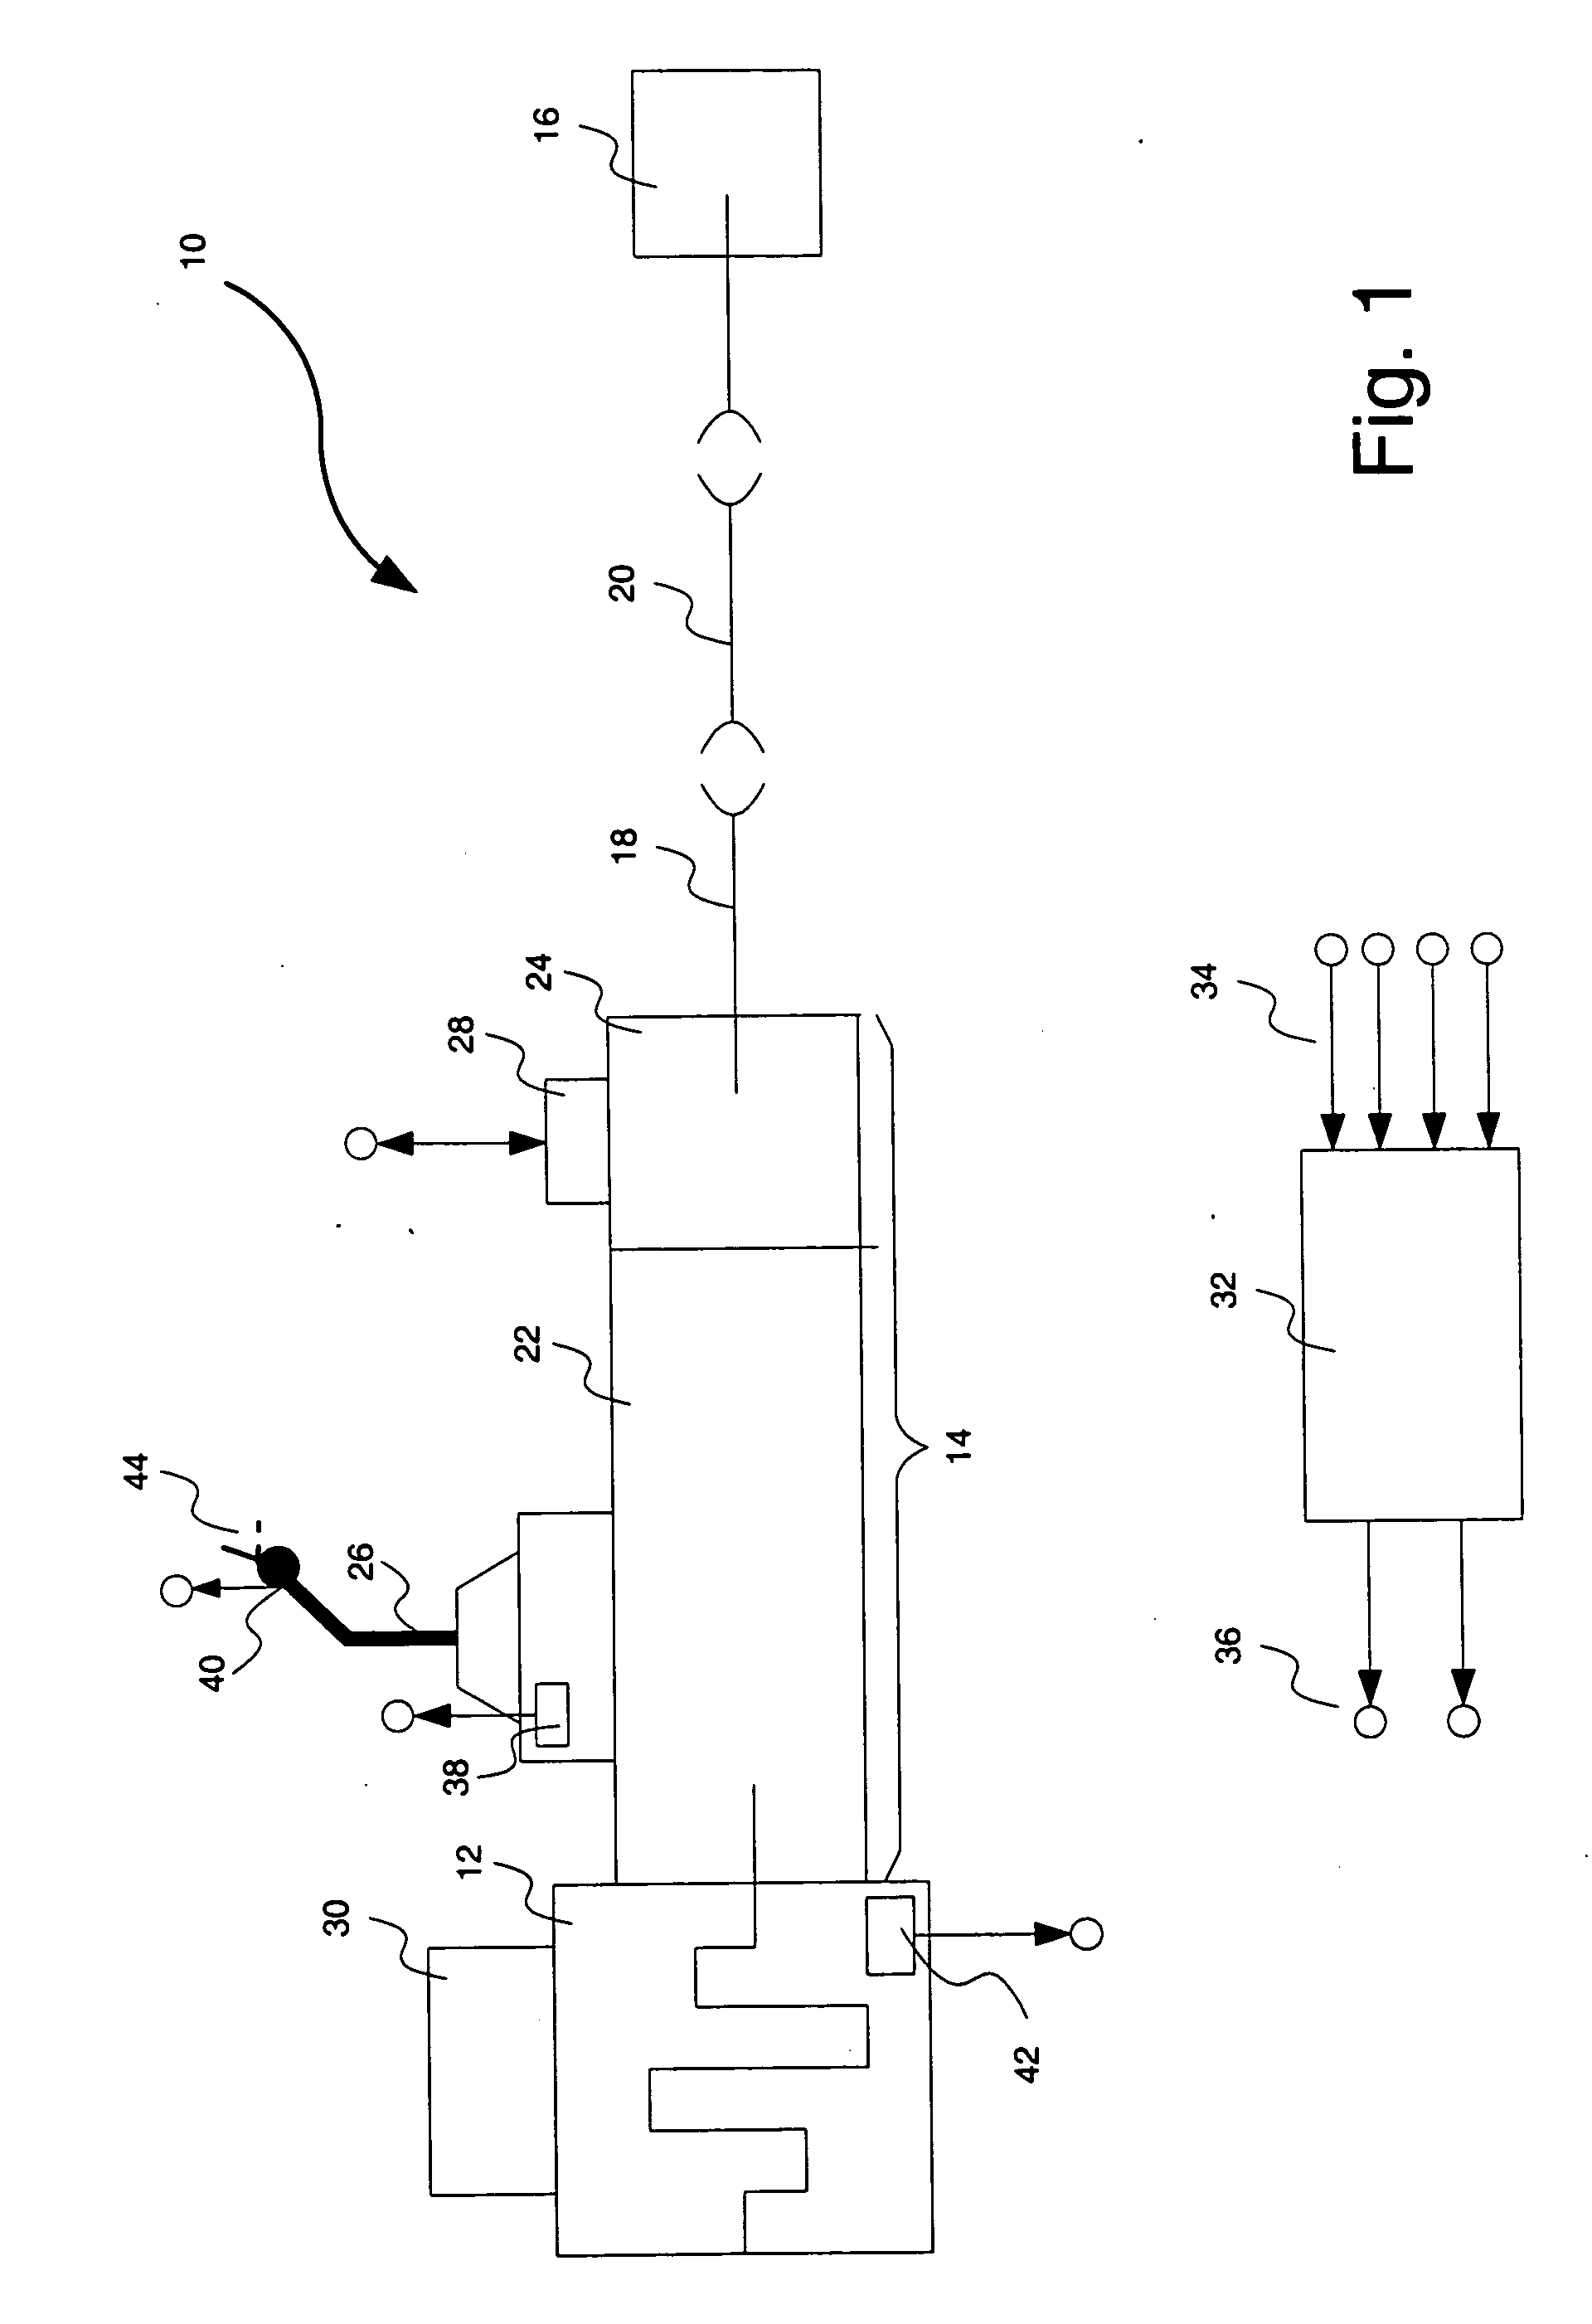 Range control method for lever shifted compound transmissions